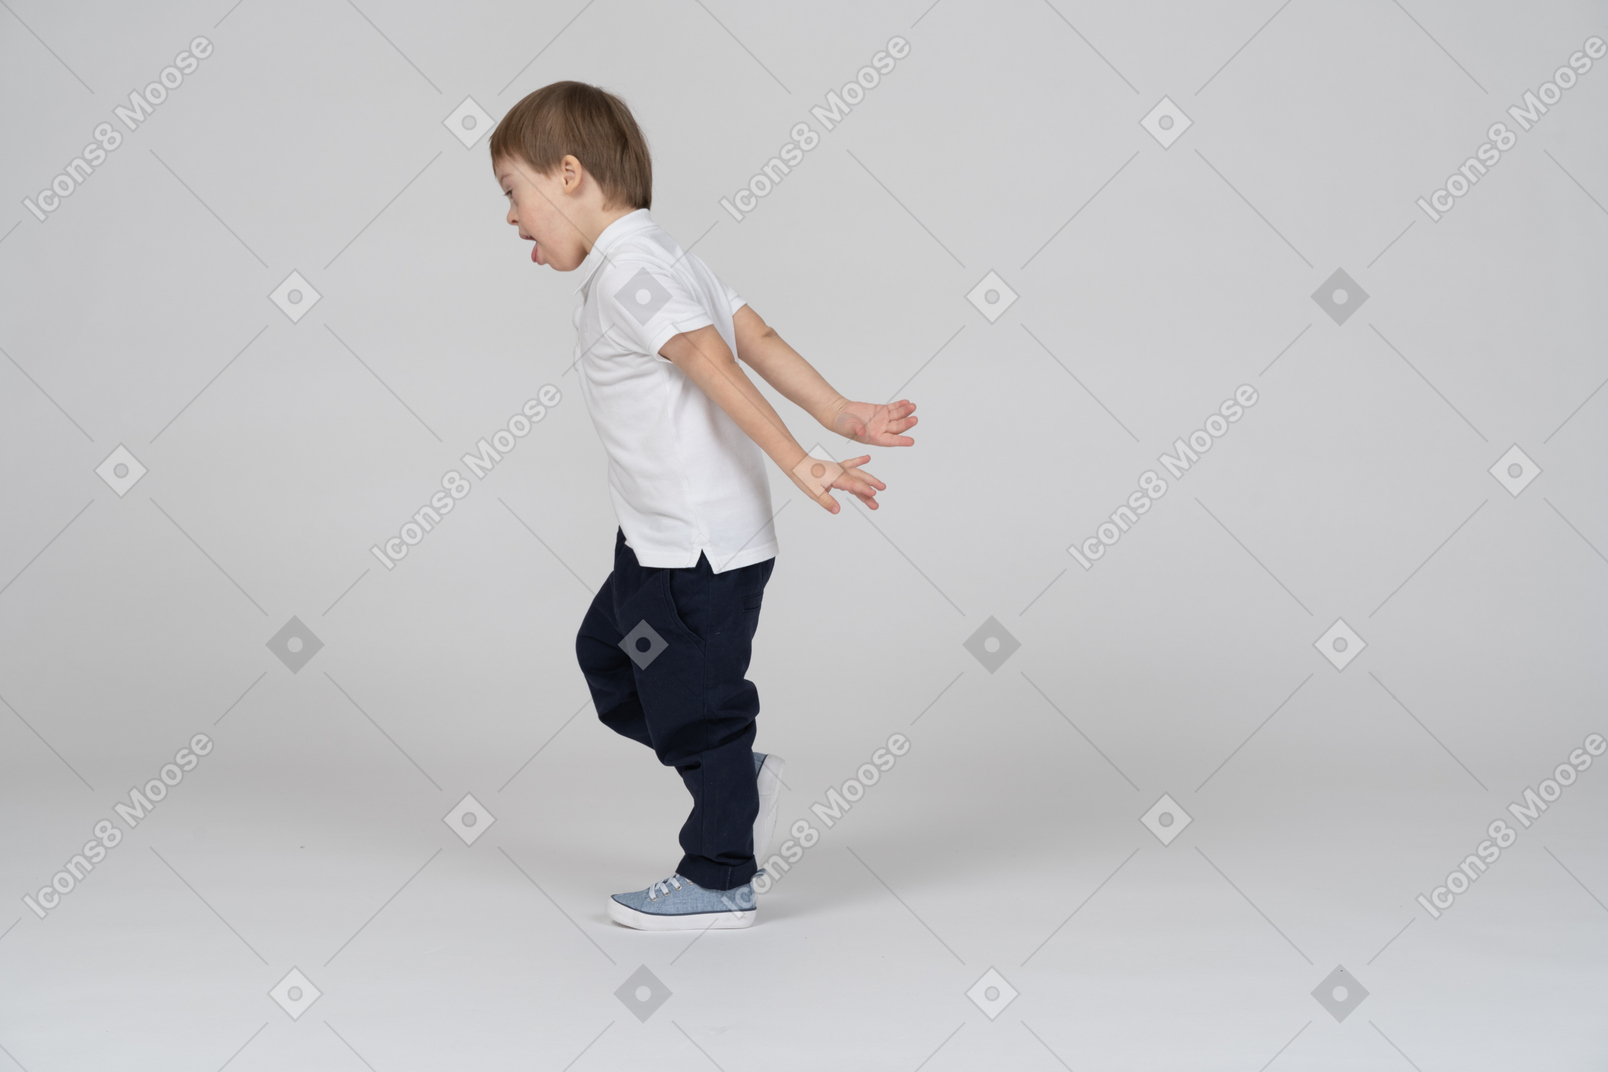 Little boy running with his arms outstretched behind him